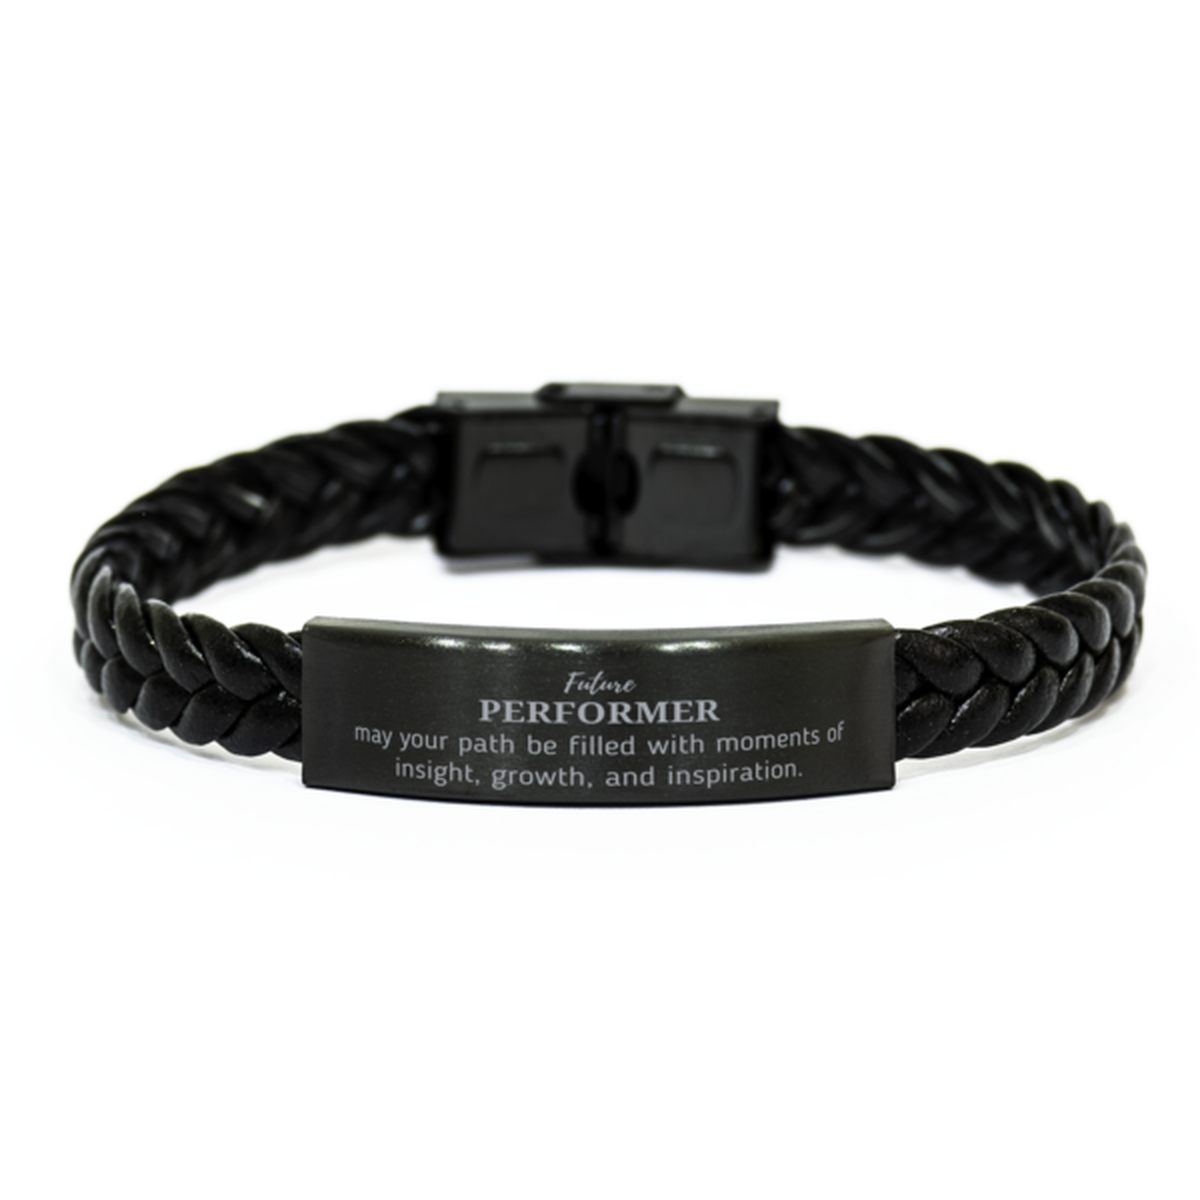 Future Performer Gifts, May your path be filled with moments of insight, Graduation Gifts for New Performer, Christmas Unique Braided Leather Bracelet For Men, Women, Friends